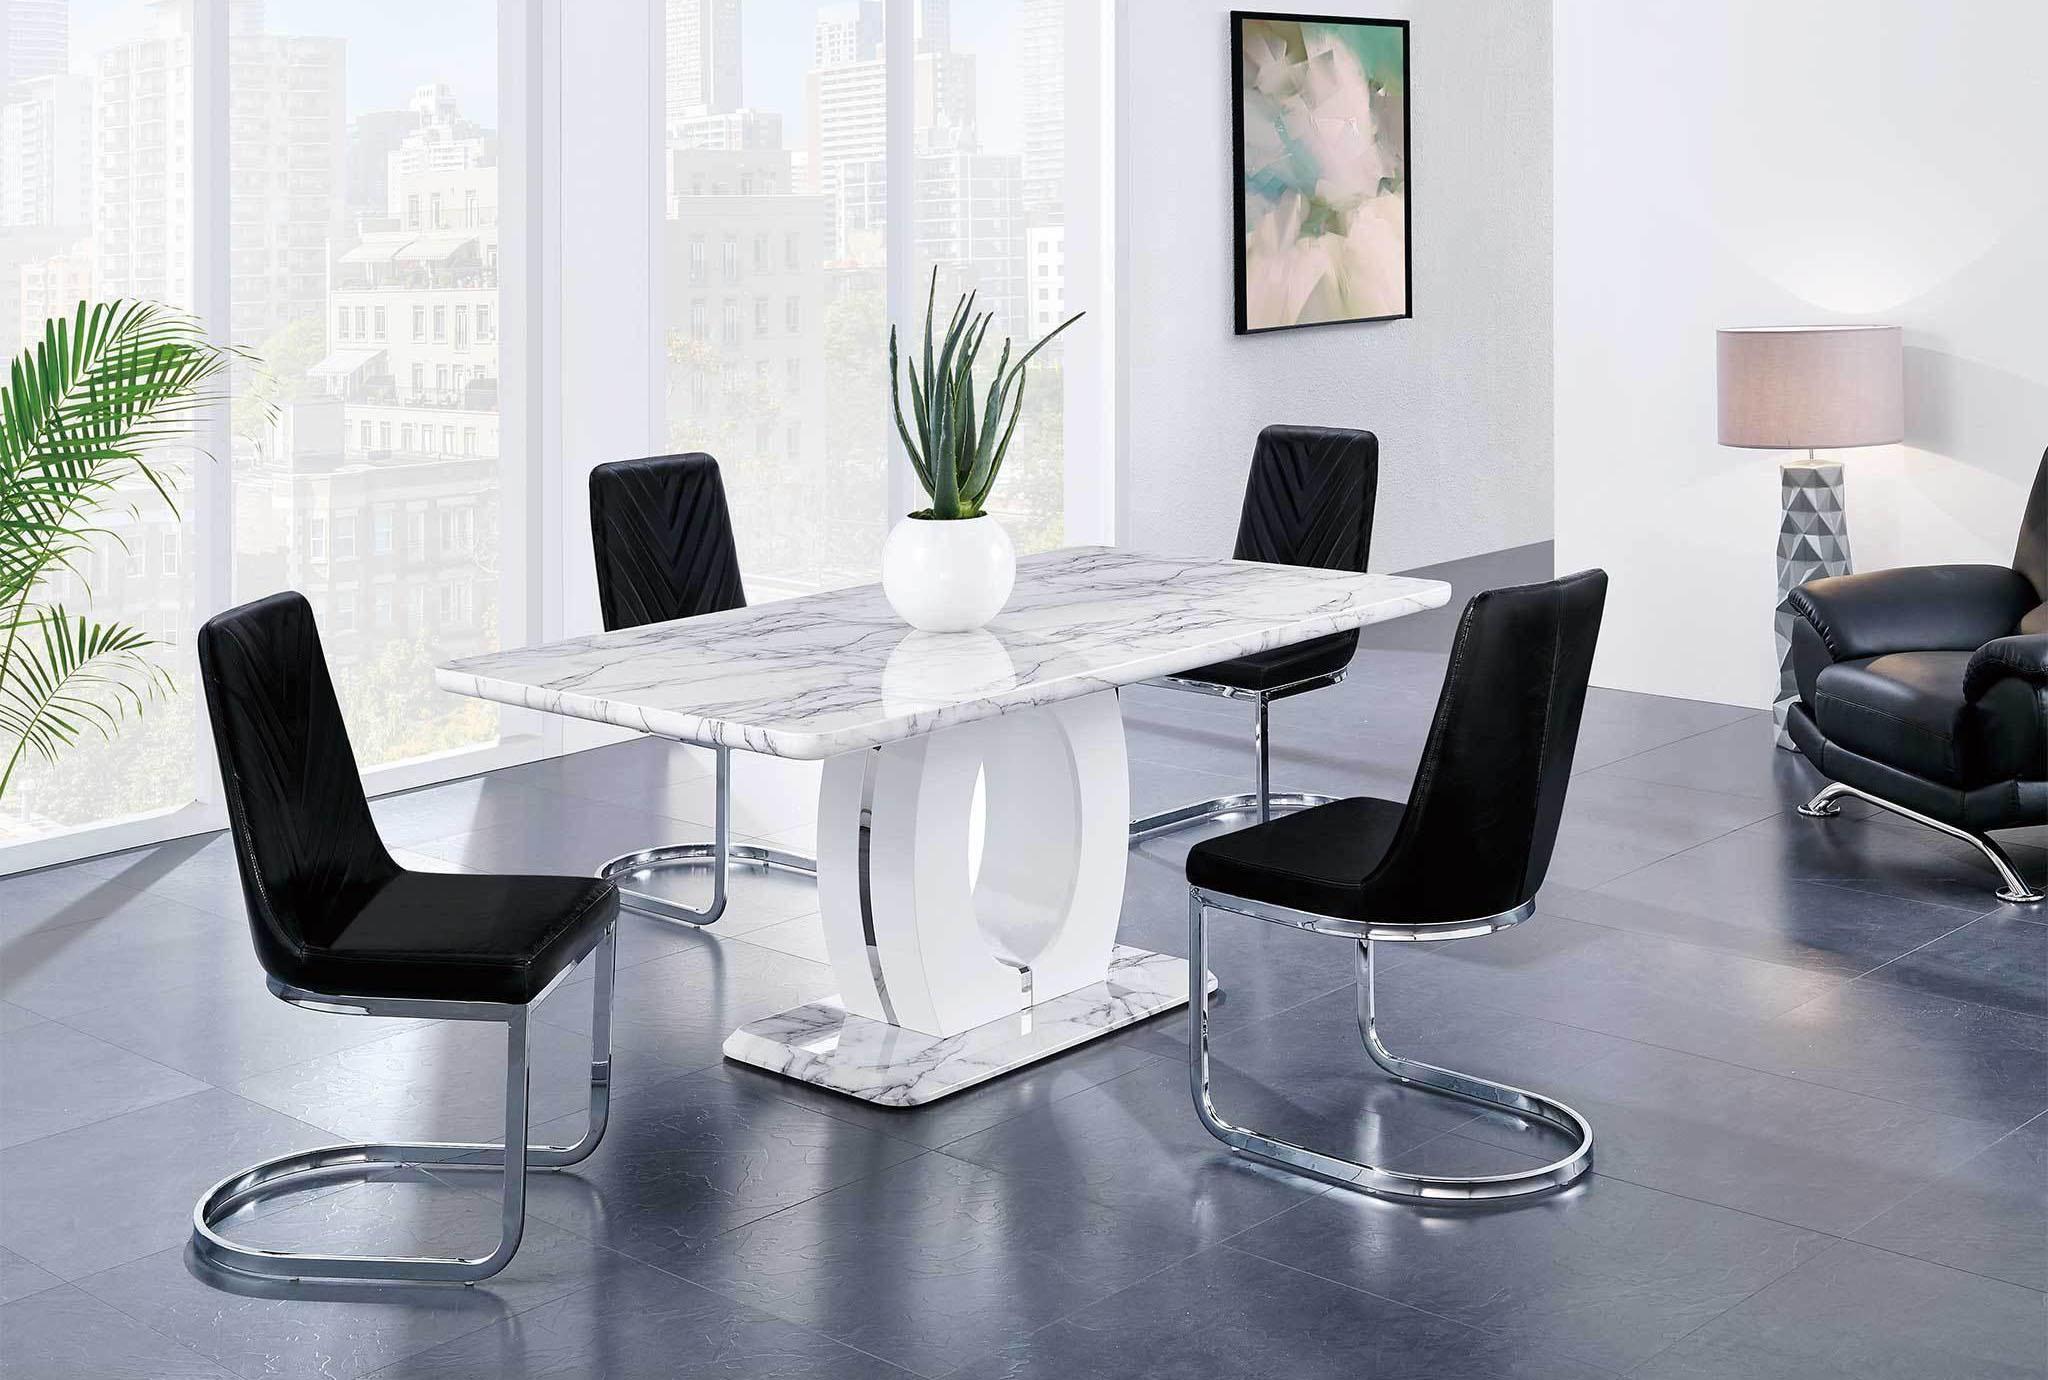 Contemporary Dining Table Set D894DT / D1067DC-BL D894DT W/D1067 DC-BL DINING SET-5 in White, Silver, Black Faux Leather